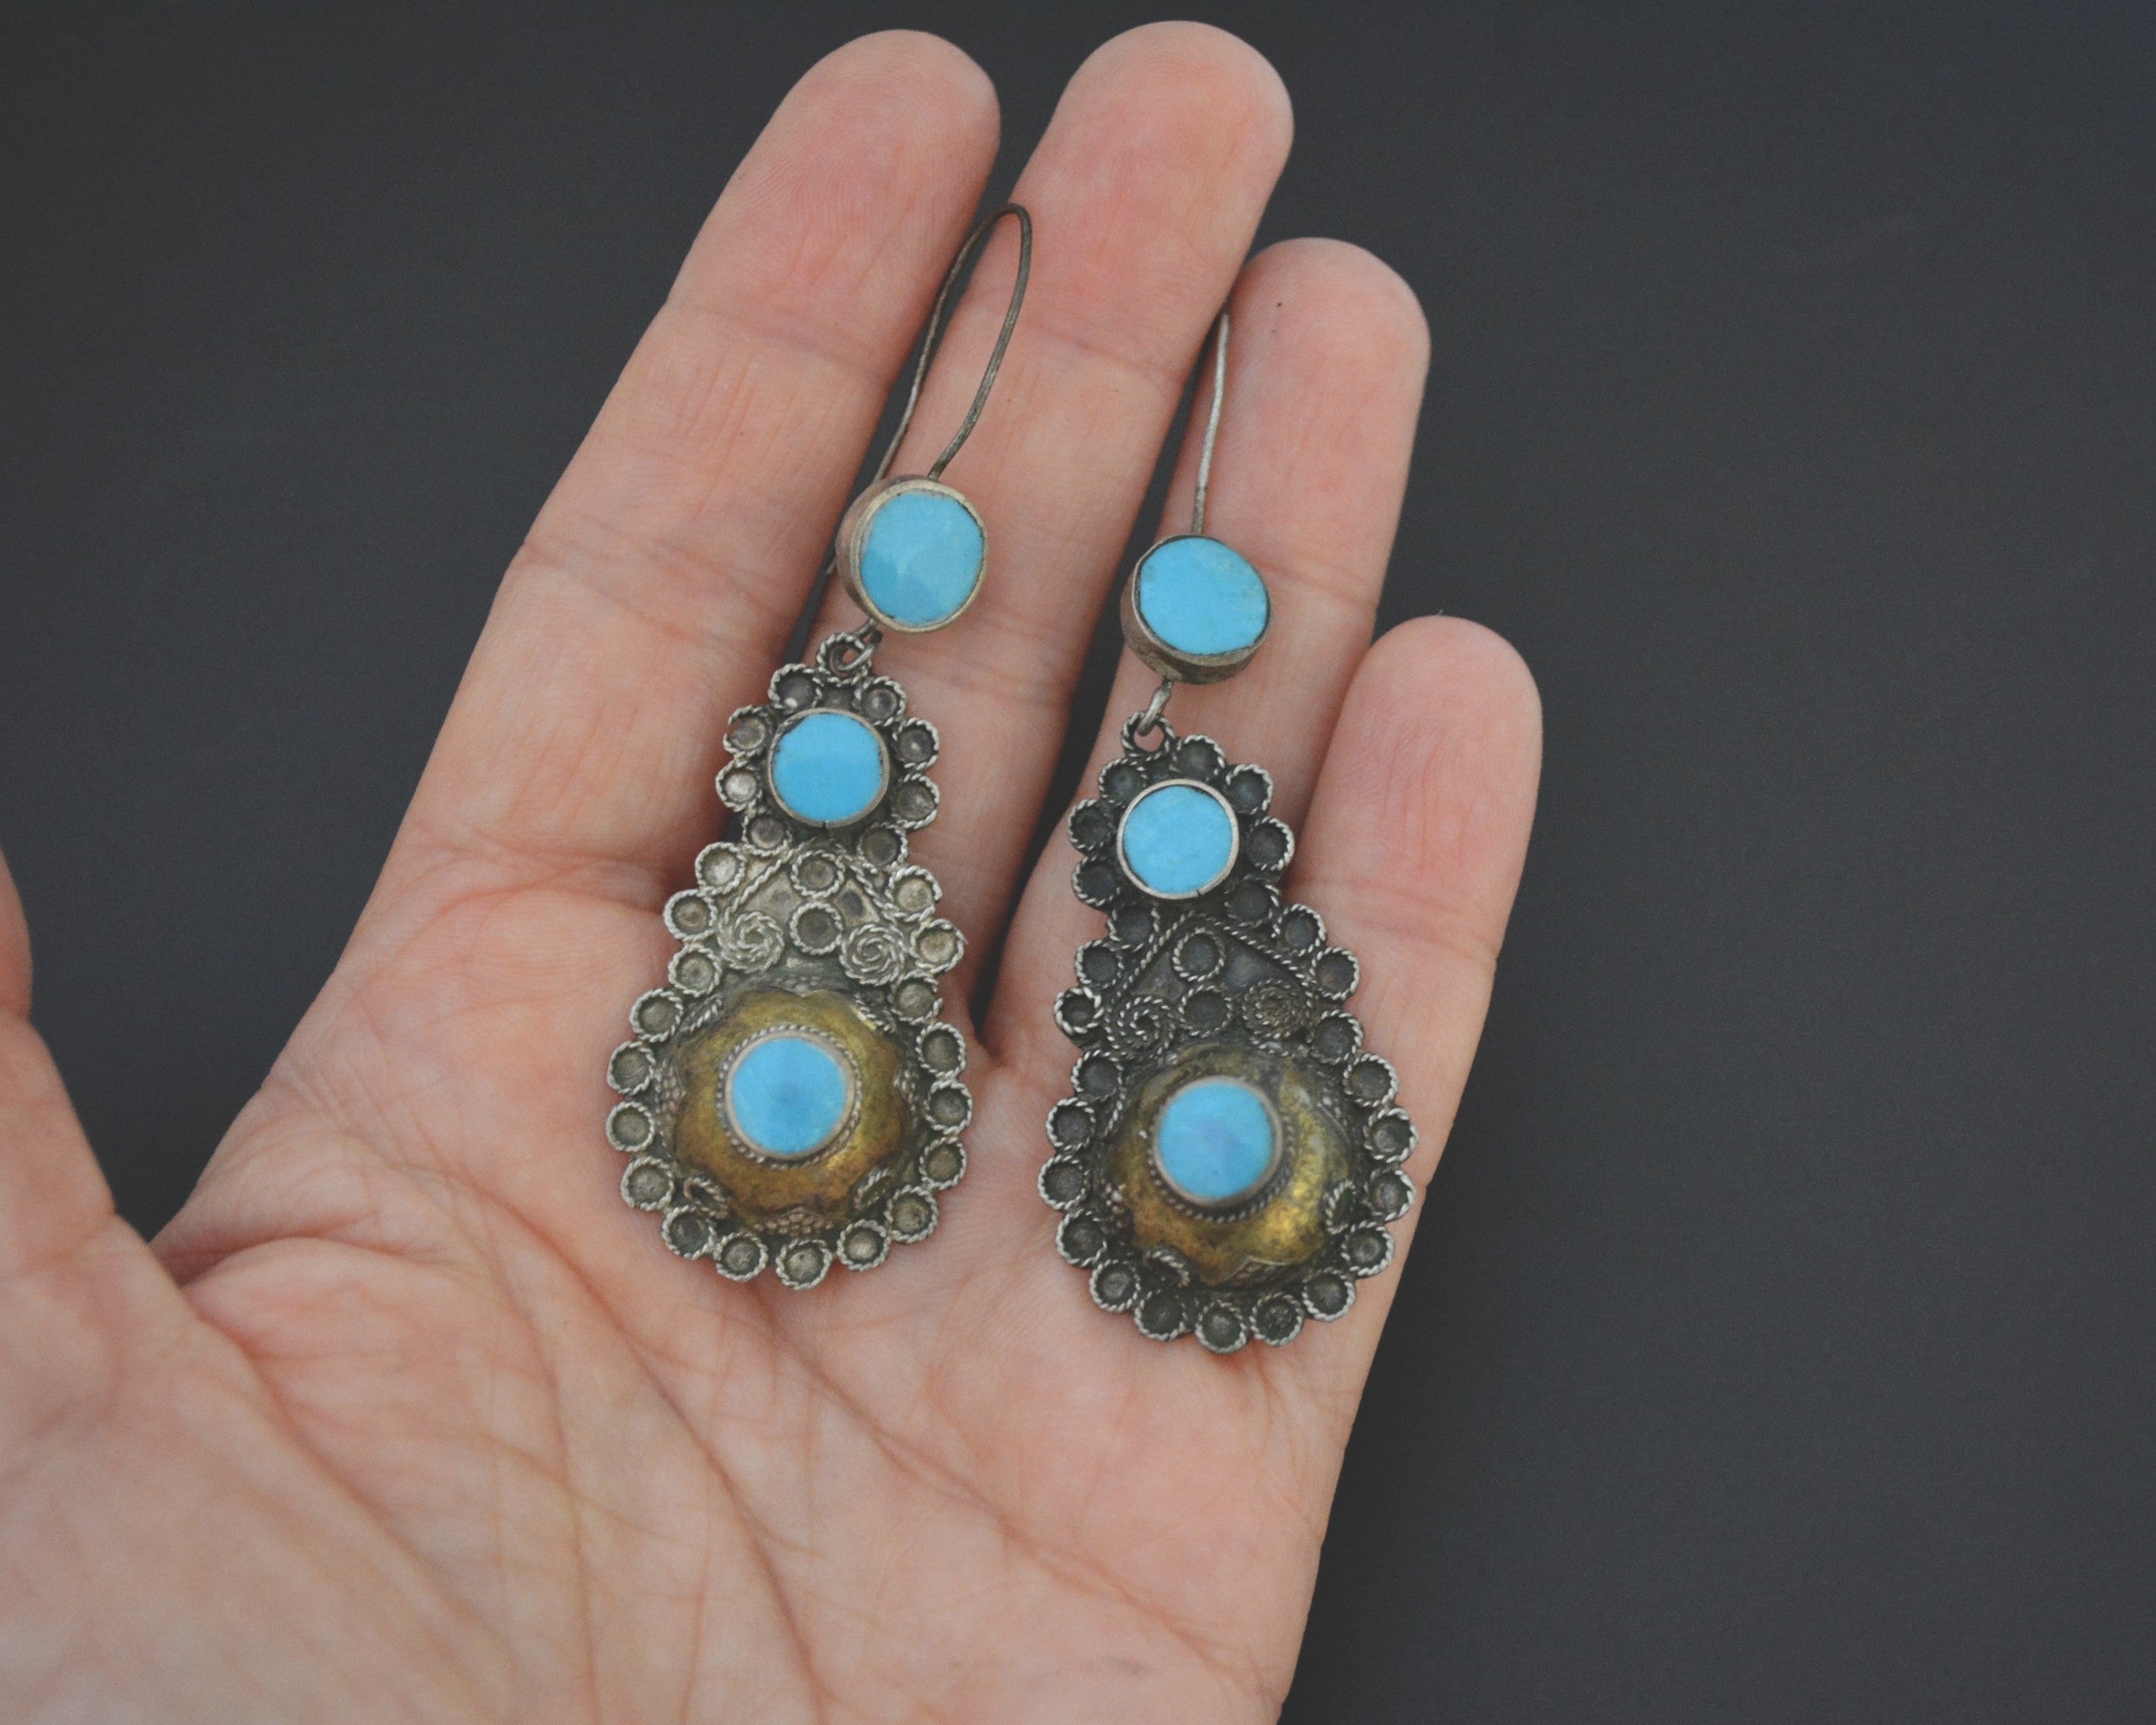 Afghani Silver Gilded Earrings with Turquoise